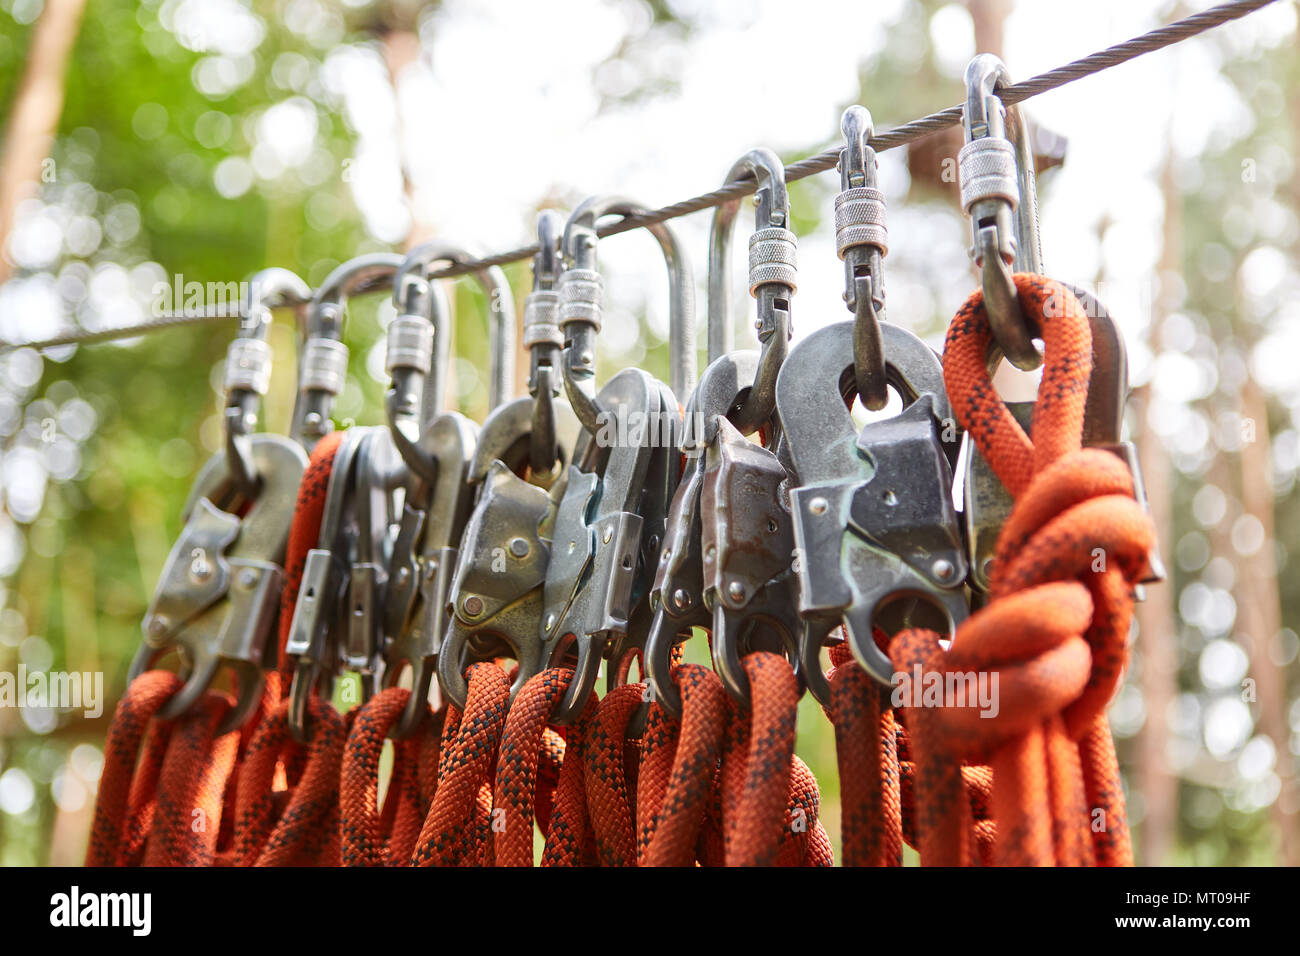 Ropes and snap hooks as equipment for safety in sport climbing Stock Photo